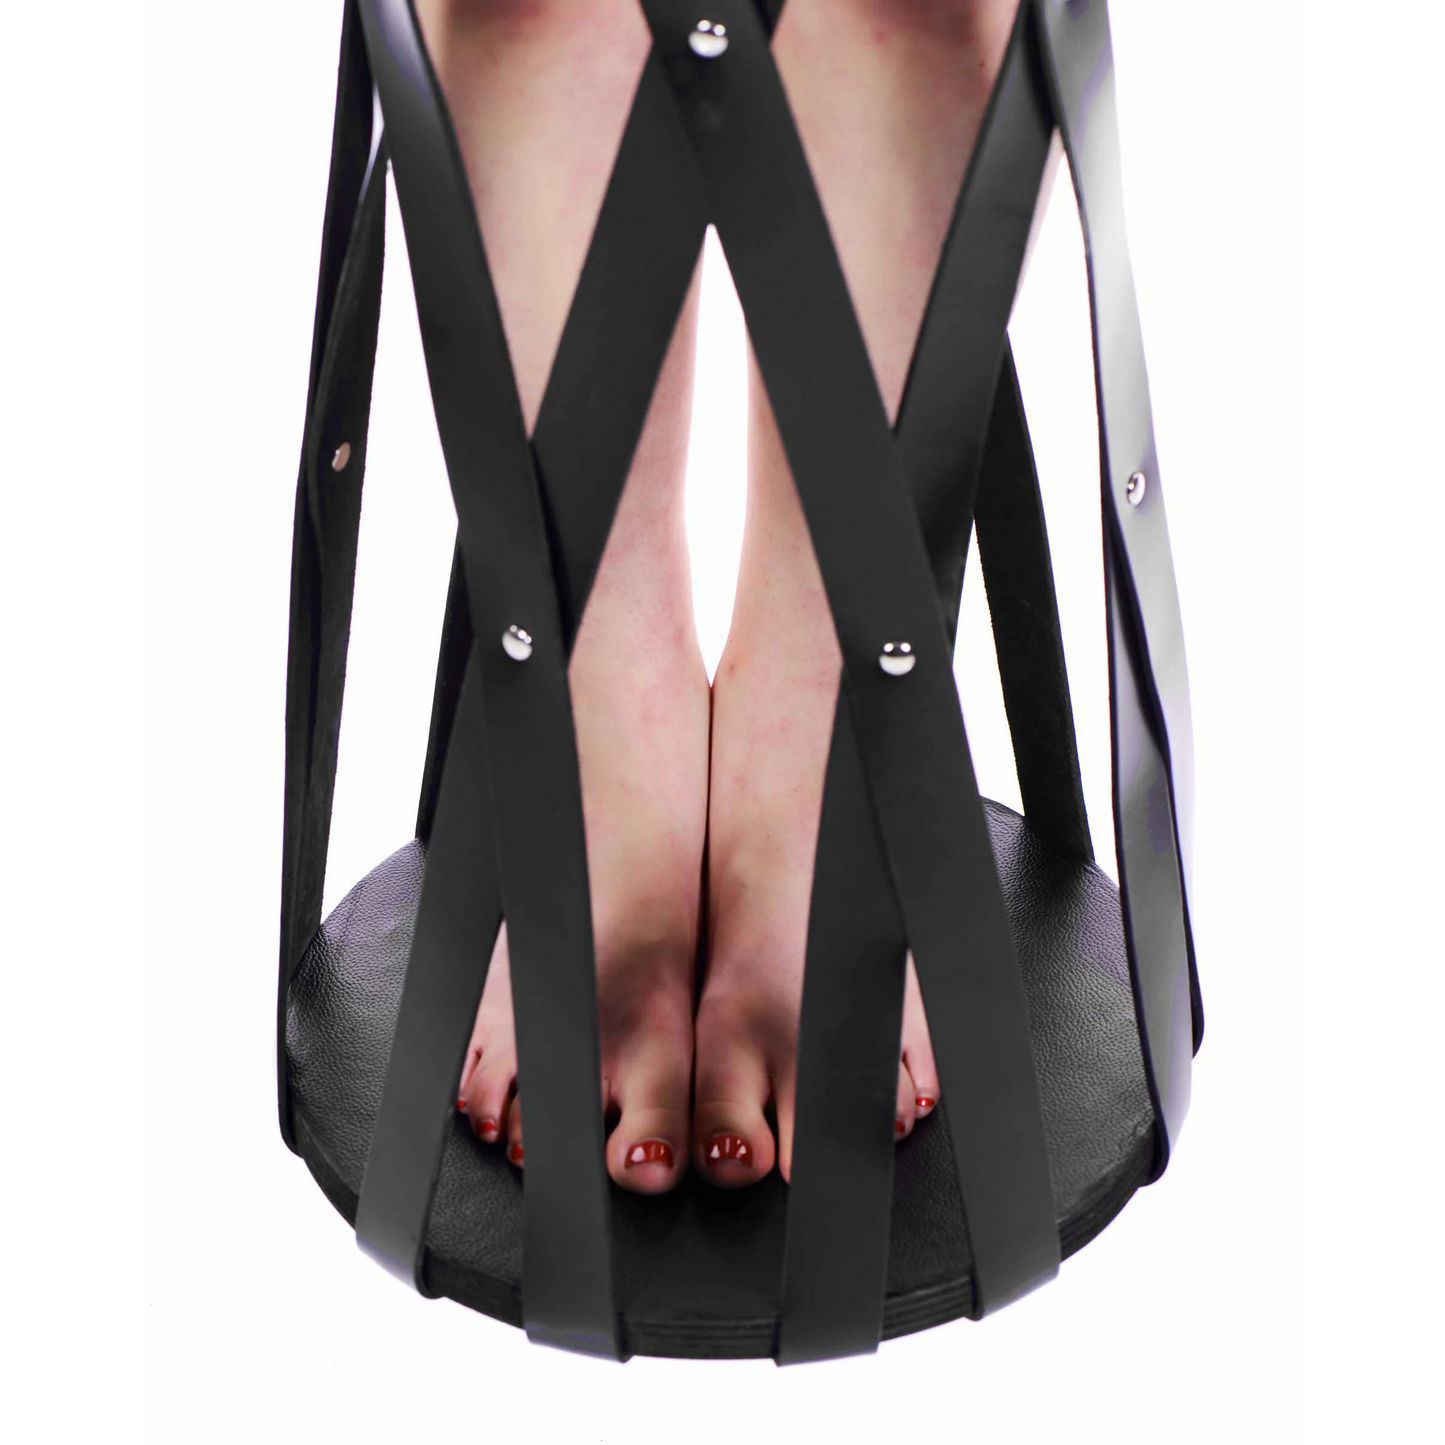 Strict Leather Hanging Leather Strap Cage - XOXTOYS